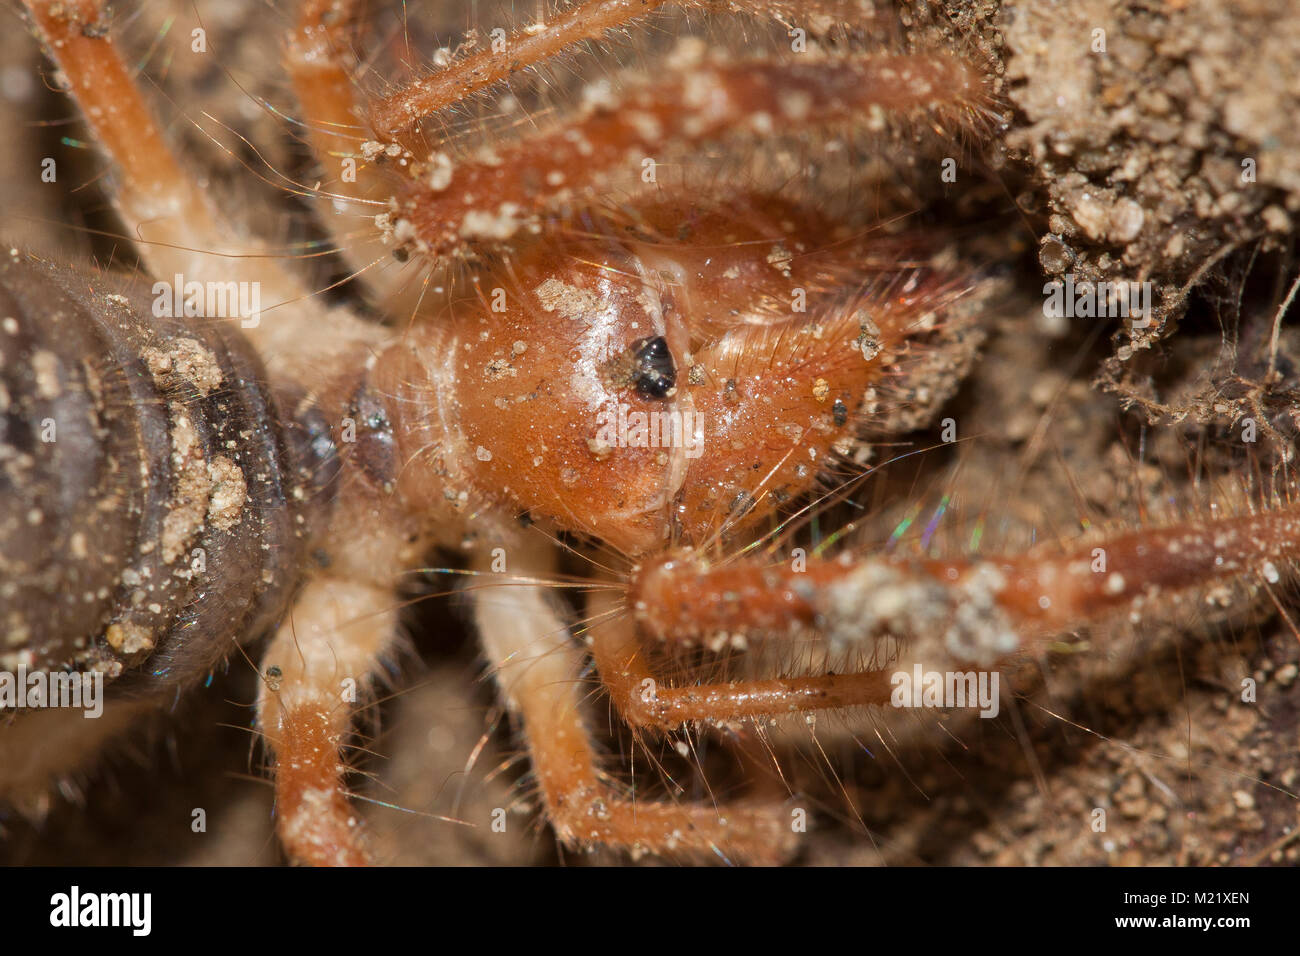 Solifugae is an order of animals in the class Arachnida known variously as camel spiders, wind scorpions, sun spiders, or solifuges. Macro portrait Stock Photo